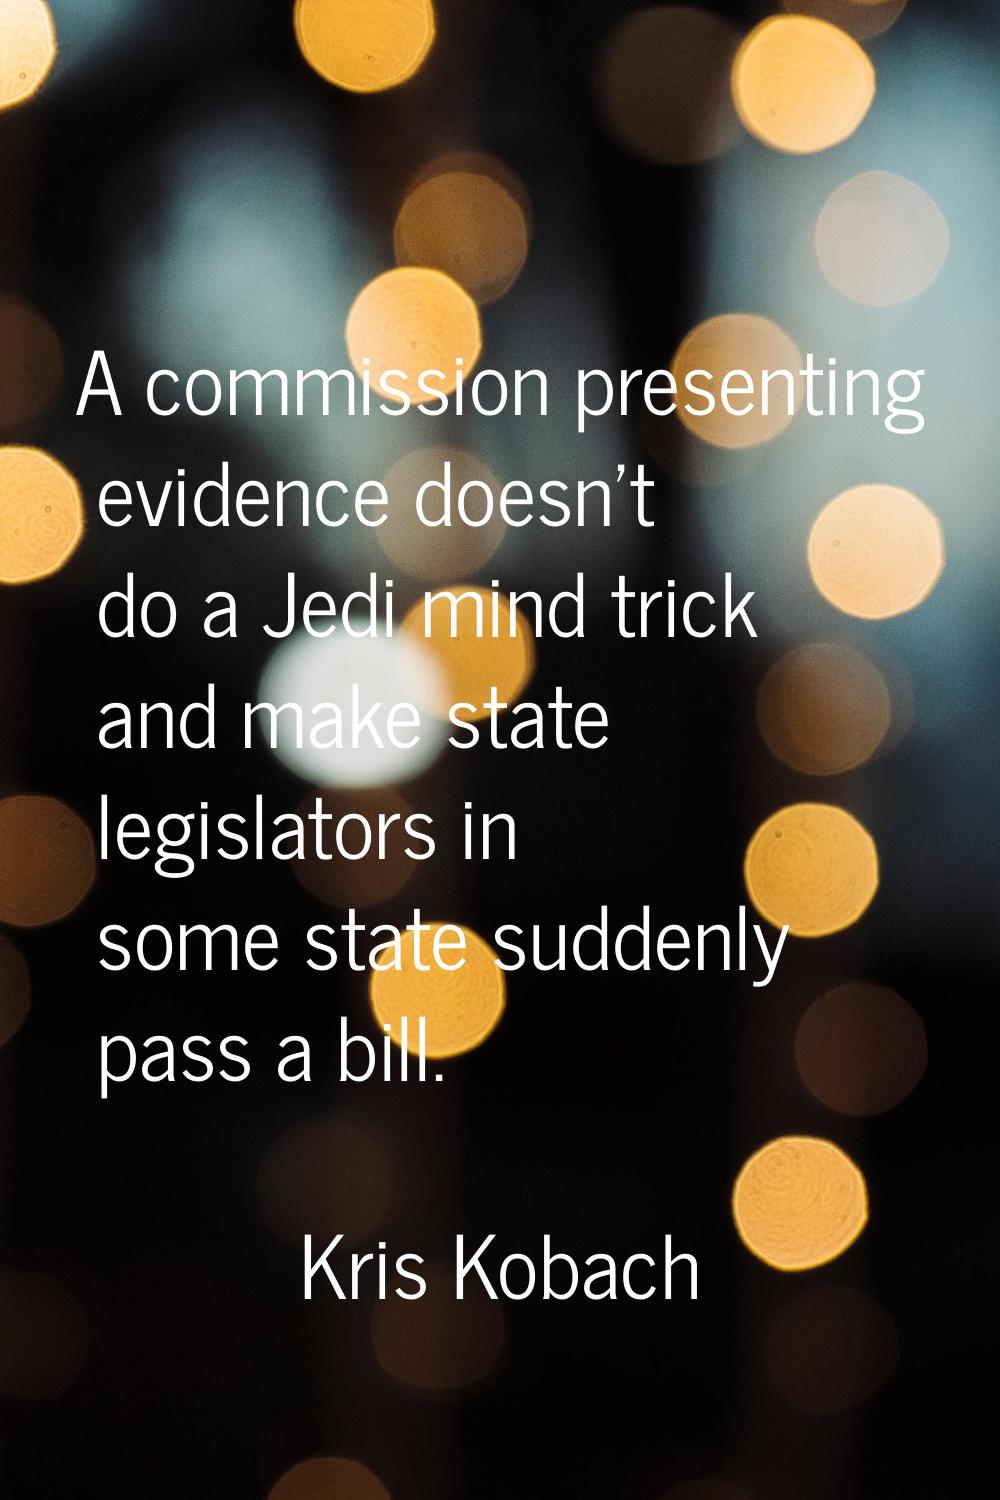 A commission presenting evidence doesn't do a Jedi mind trick and make state legislators in some st